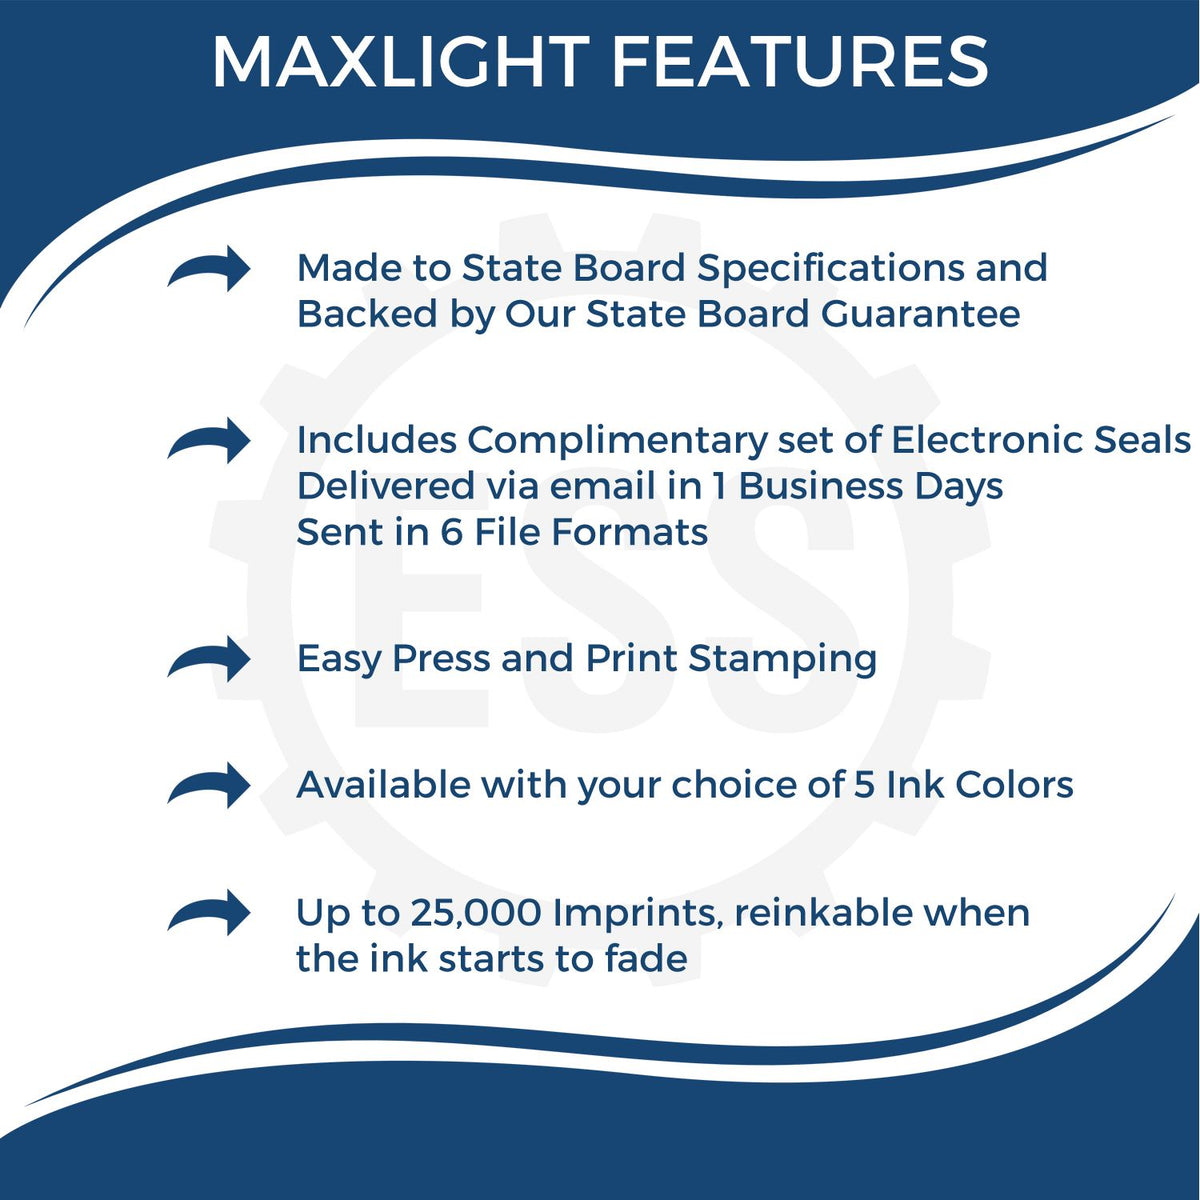 A picture of an infographic highlighting the selling points for the Premium MaxLight Pre-Inked Missouri Landscape Architectural Stamp